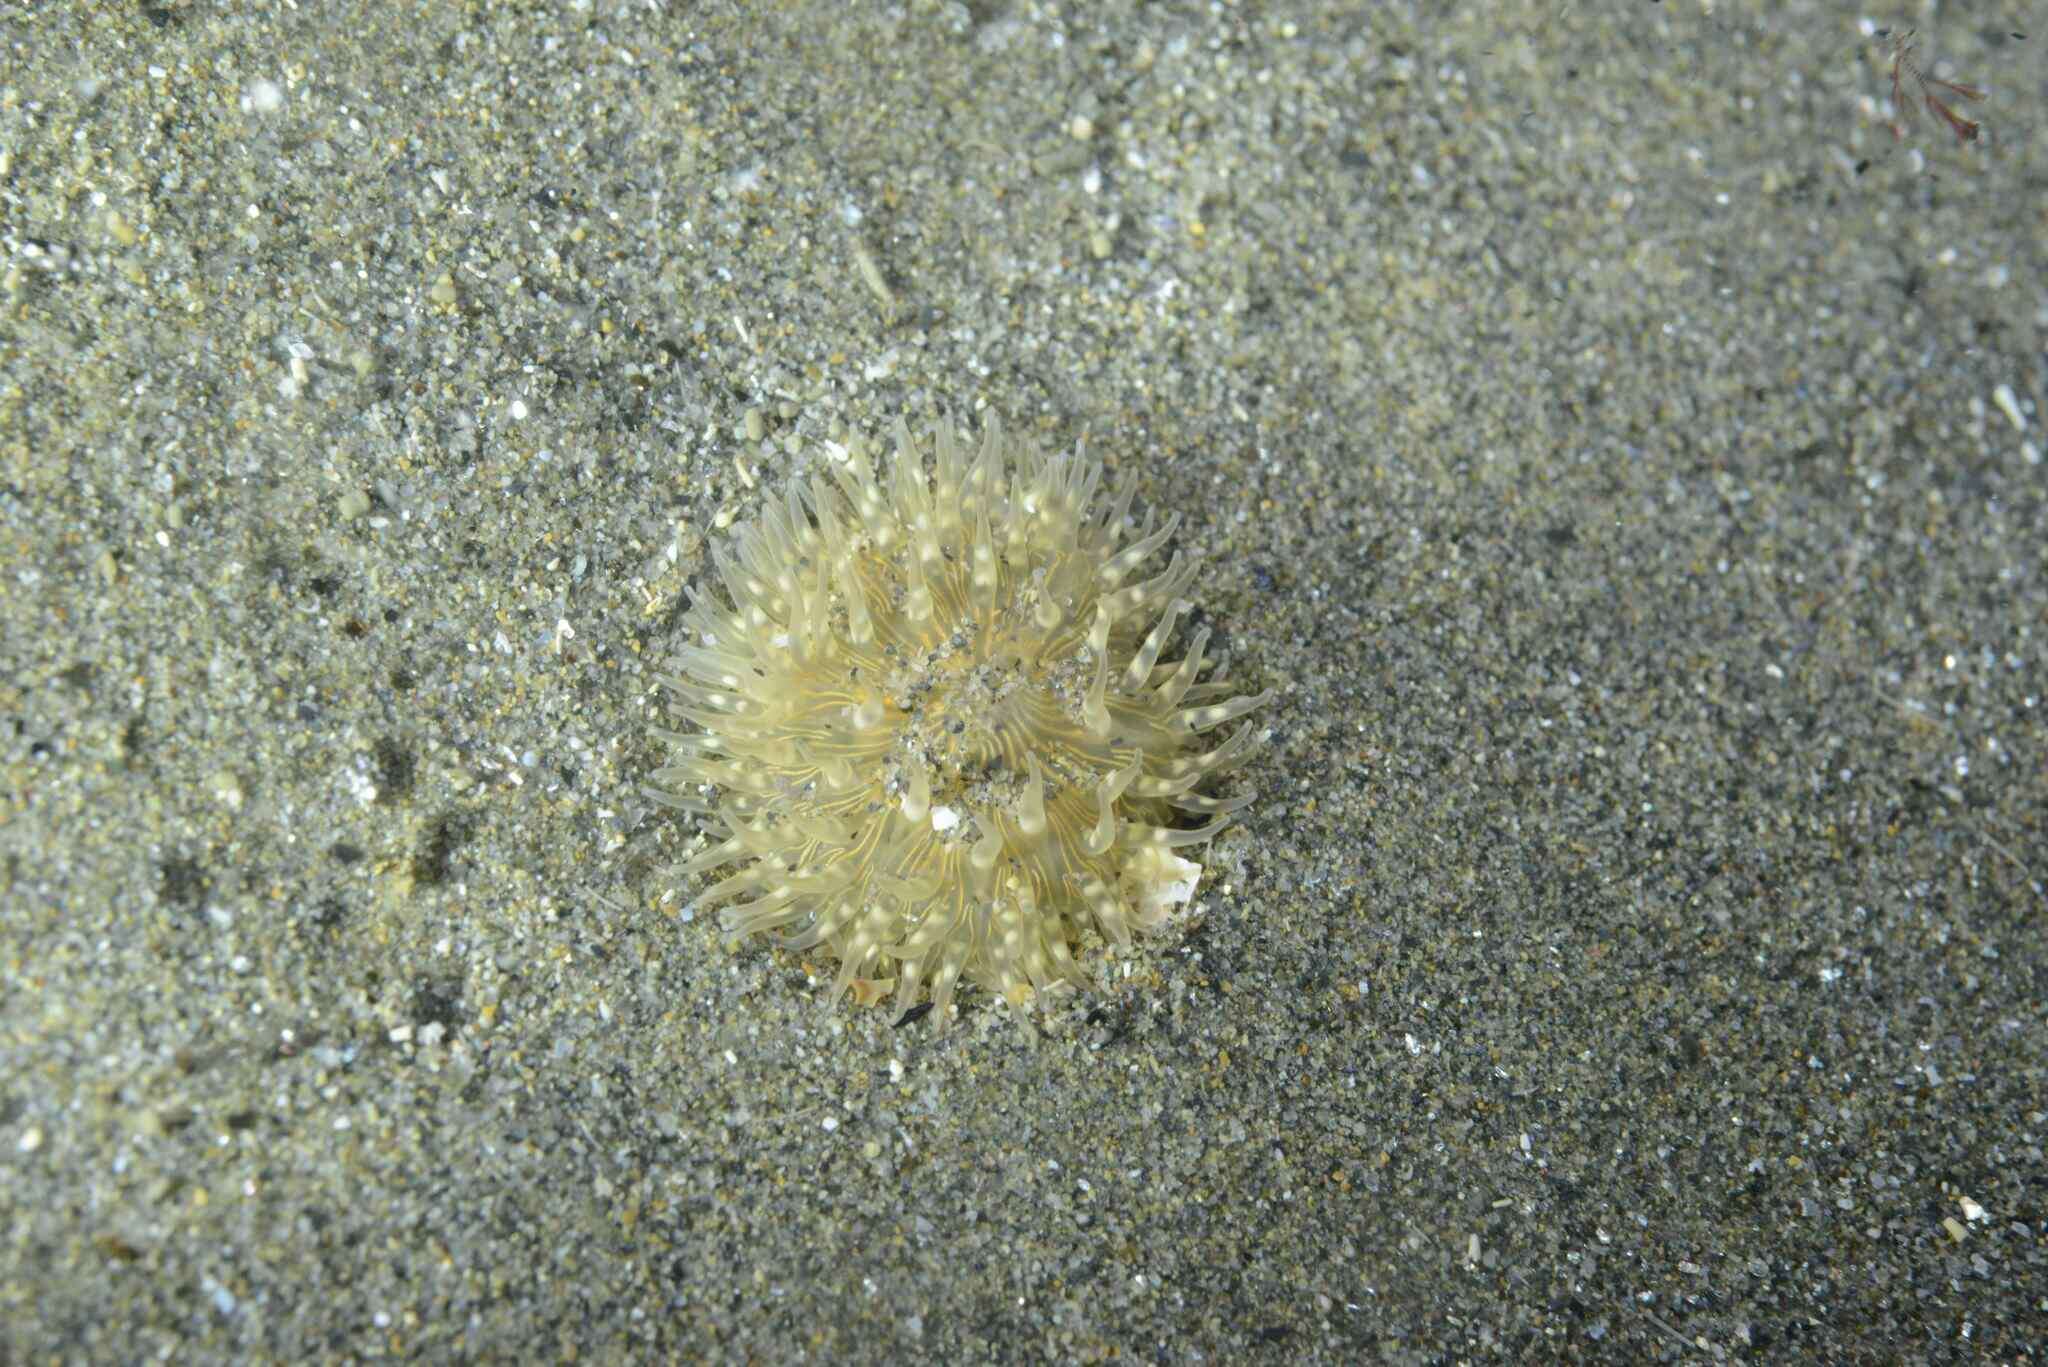 Image of cave-dwelling anemone